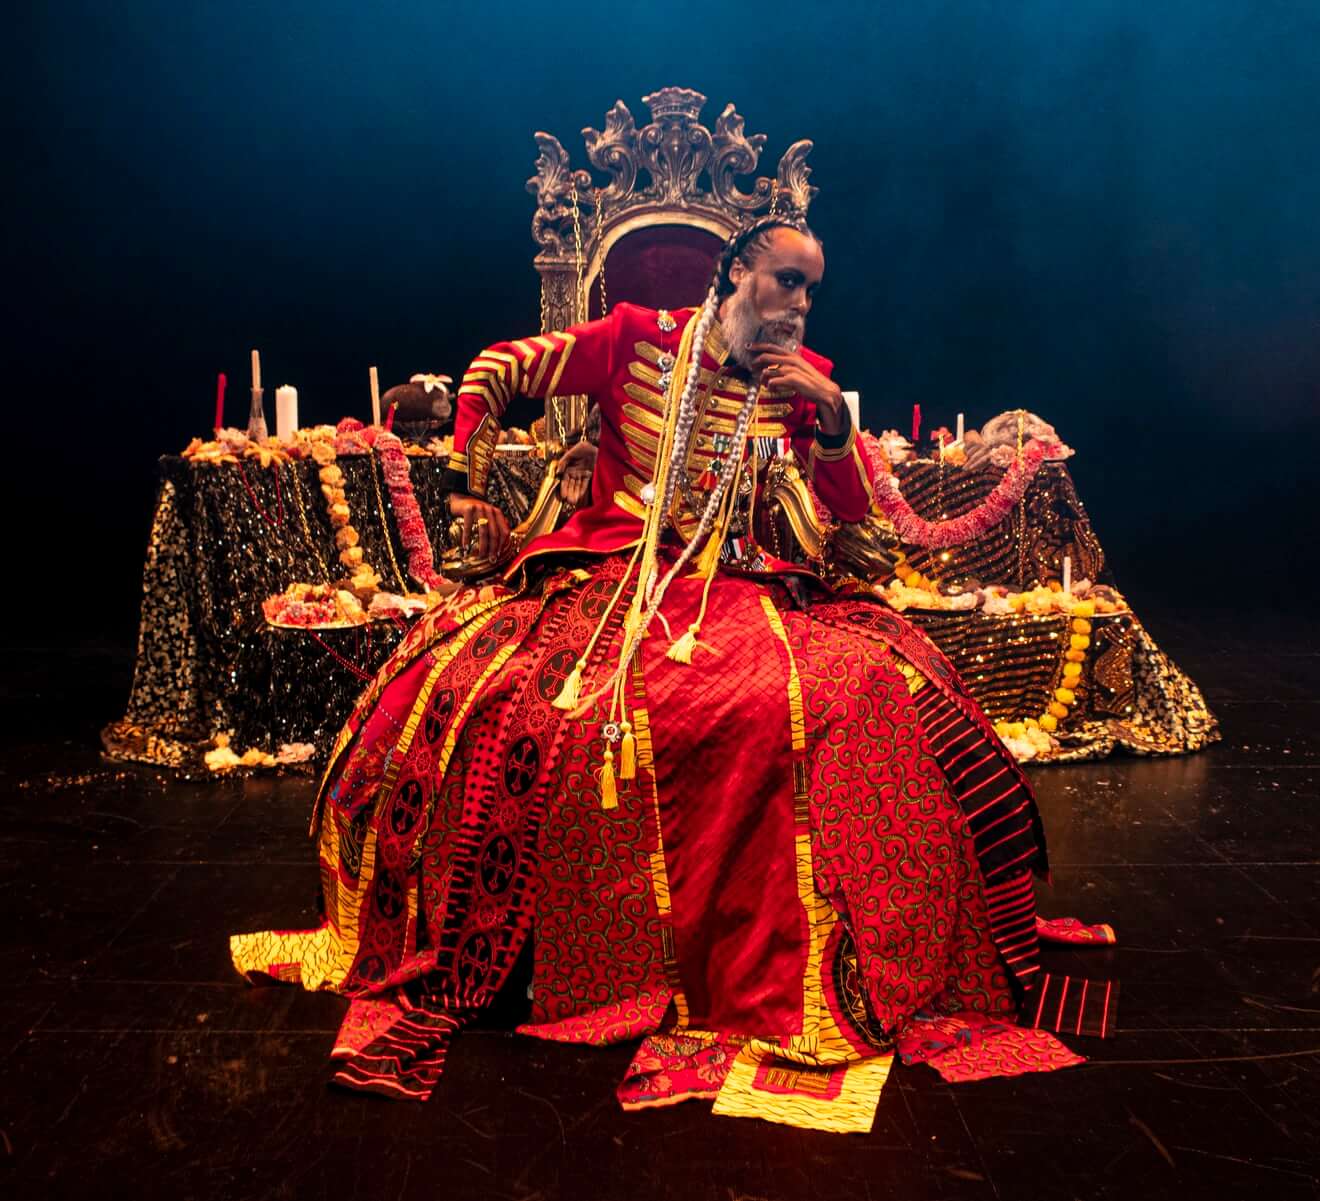 Kaneza Schaal as King Leopold II sits on a throne with her left hand lifted to her chin, left elbow leaning on the armrest, and right hand on the right armrest, elbow lifted, looking at the viewer. She wears a white beard, hair in two long white braids, and a red and gold military jacket over a red patterned hoop skirt that extends to the floor. The throne sits in front of an ornamented dais of candles, garlands, and sculpted recreations of amputated hands that reference Leopold’s gruesome reign.